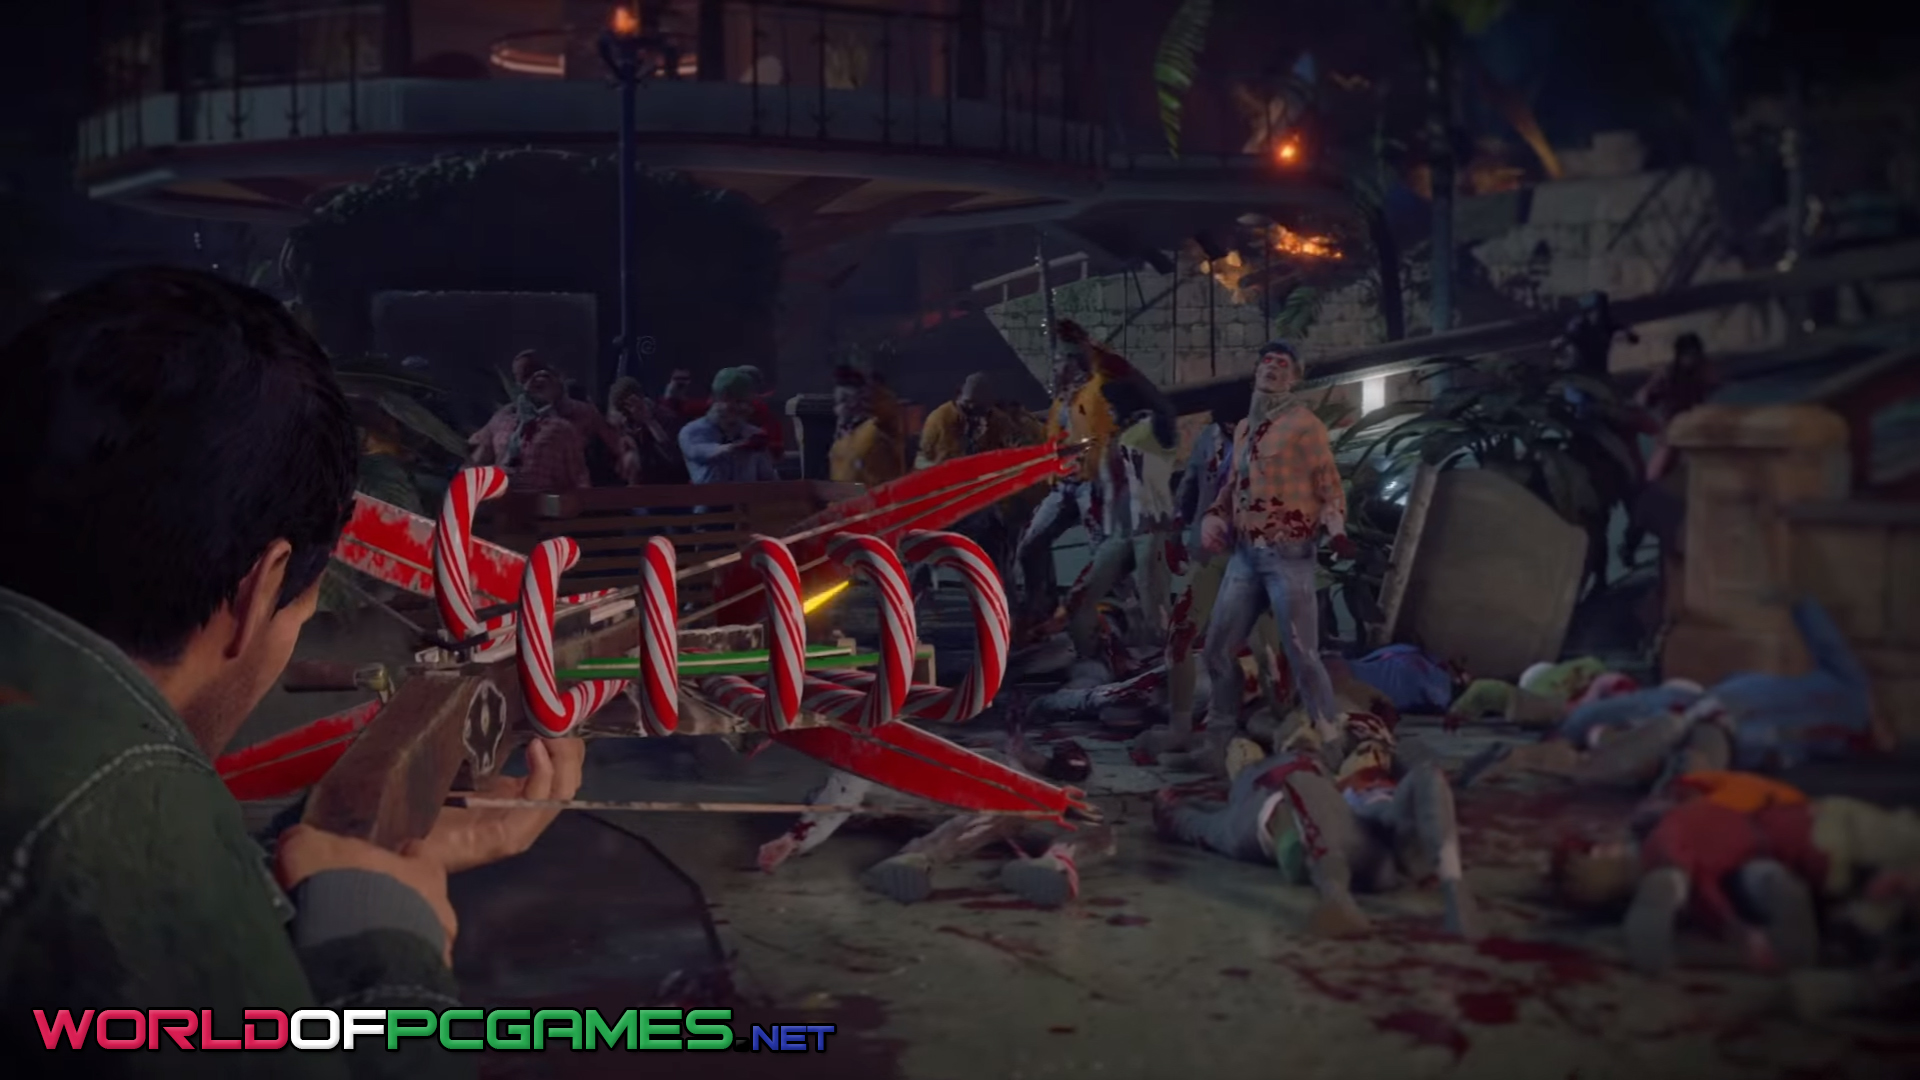 Dead Rising 4 Free Download By worldof-pcgames.net